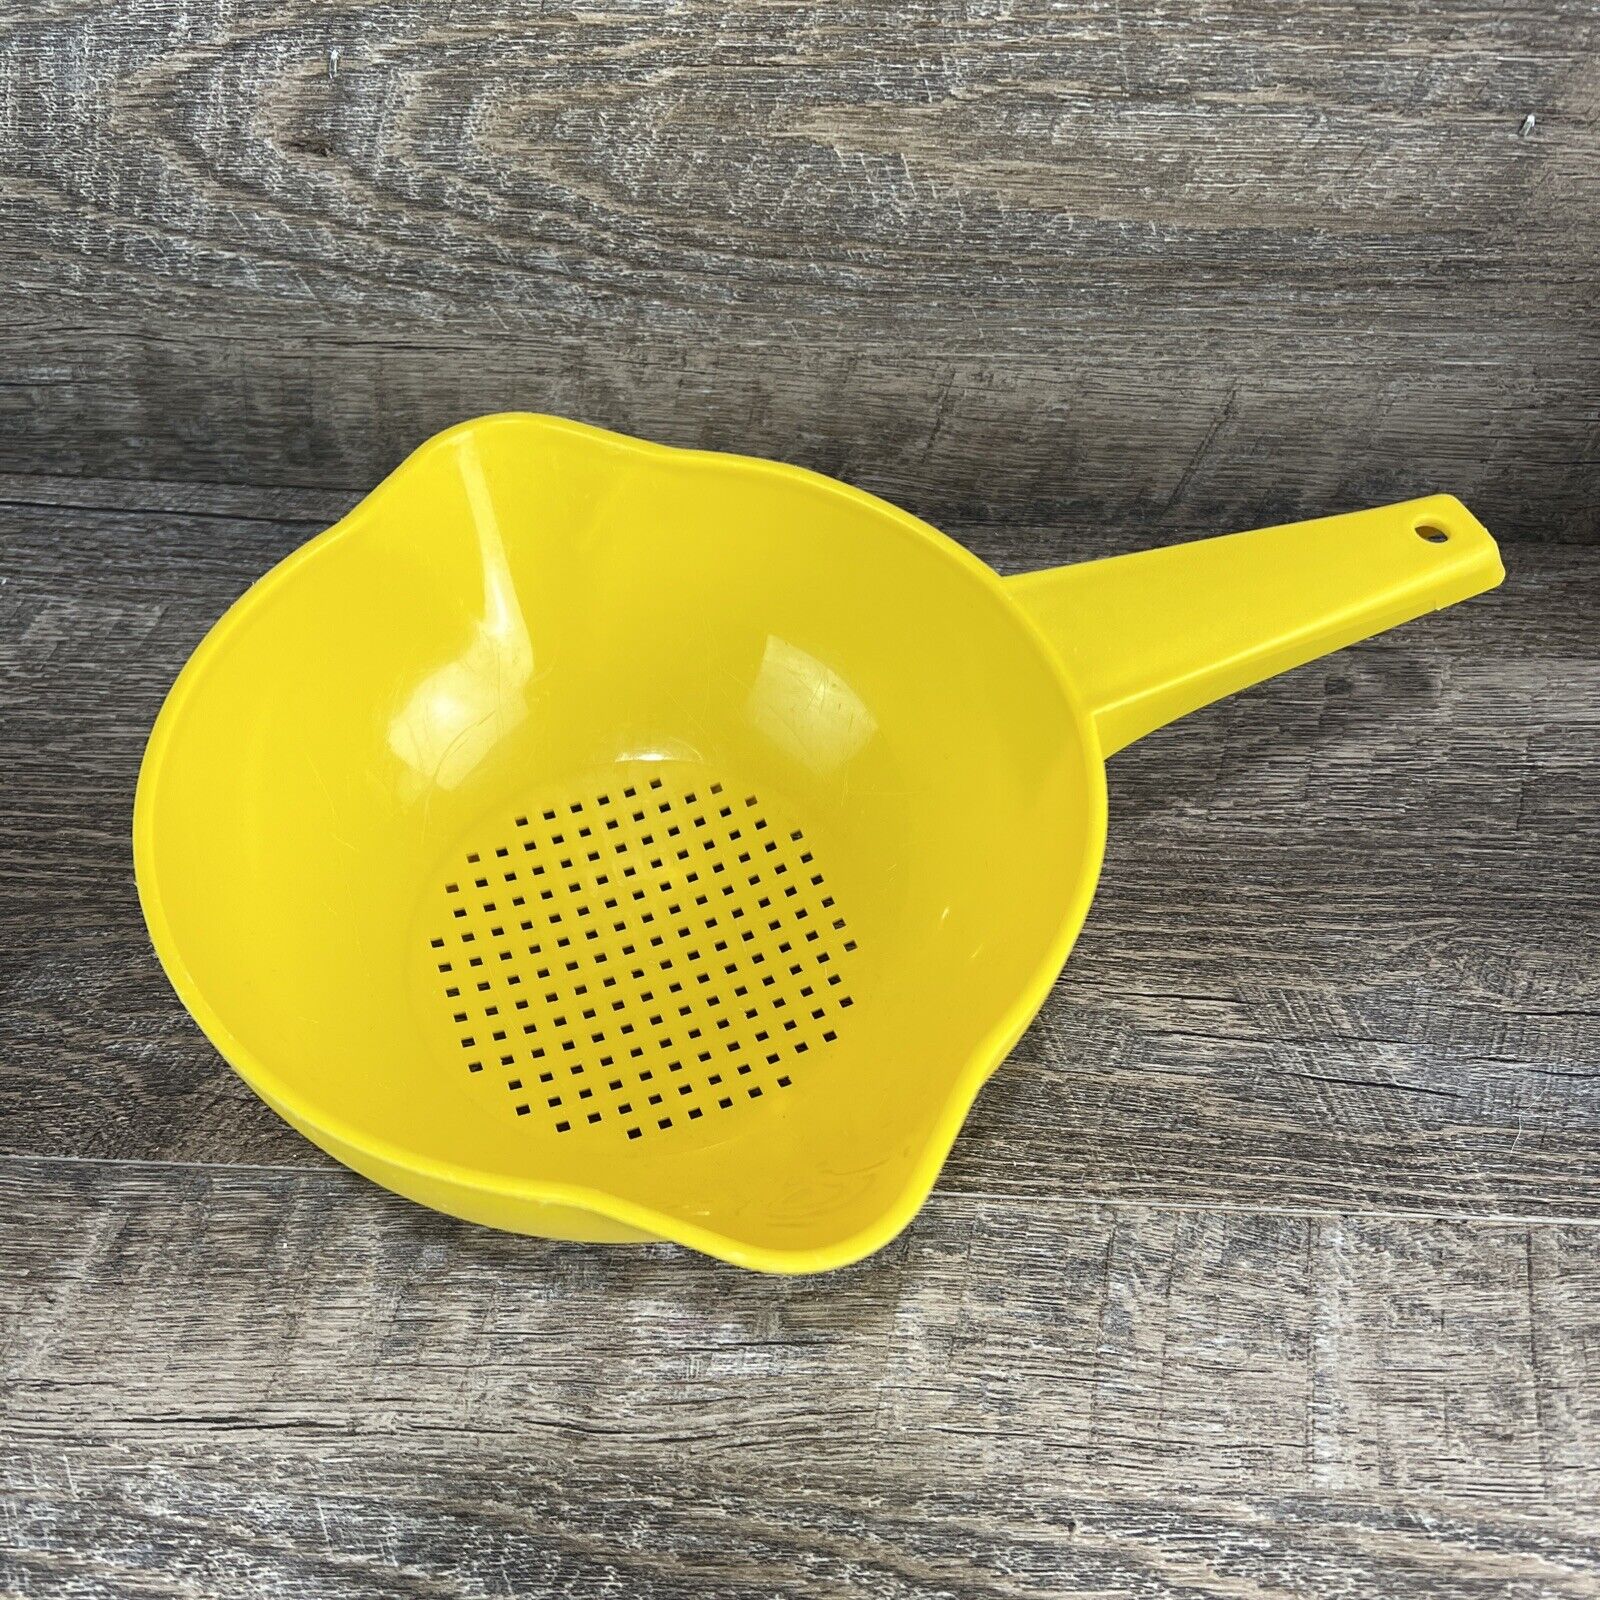 Vintage Tupperware #1200-2 Small Yellow 1 Quart Strainer Colander with Handle